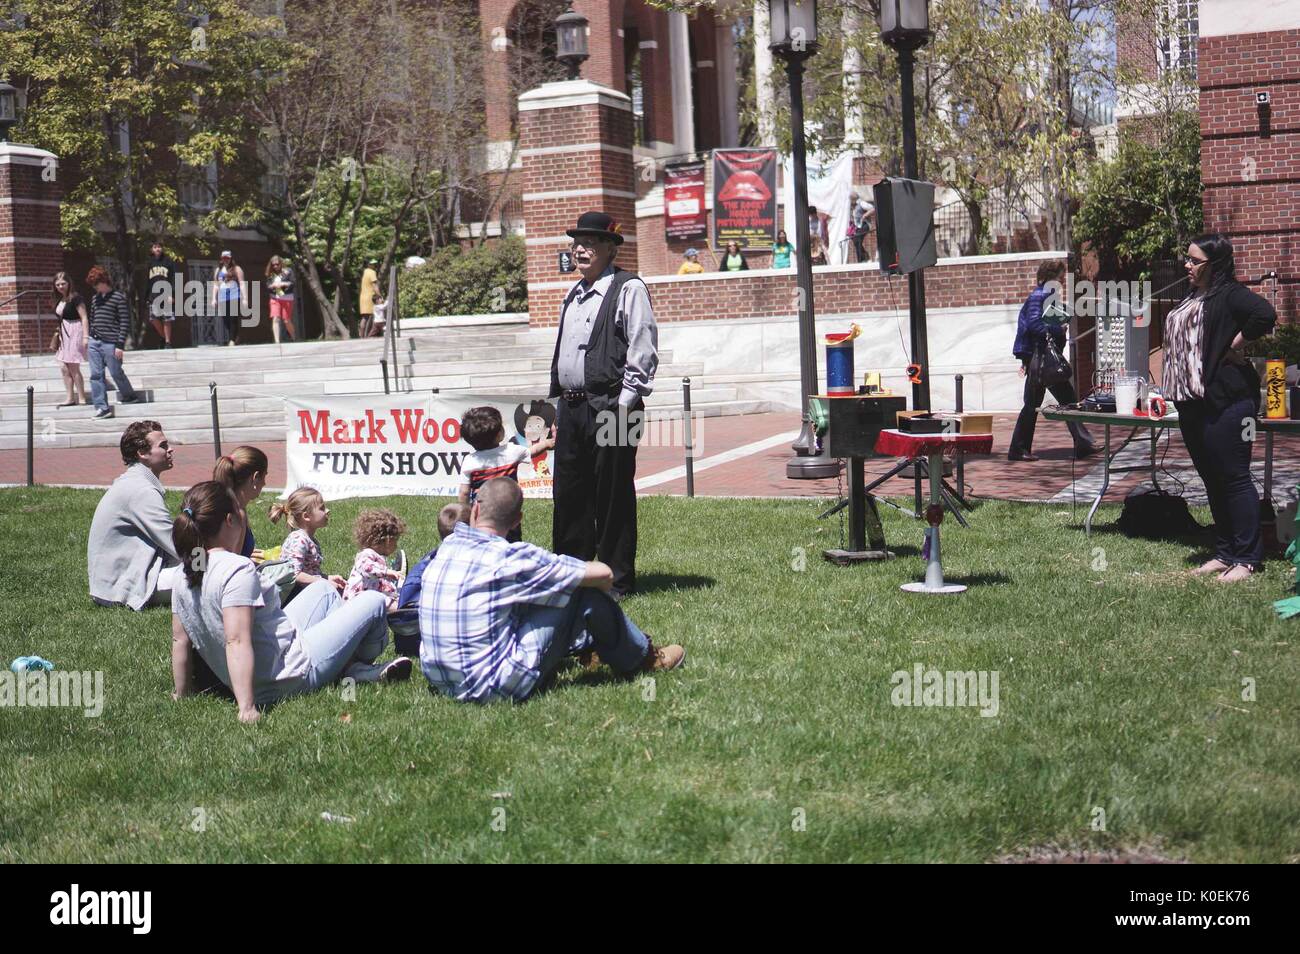 A performer gives a show to families with young children during Spring Fair, an annual festival with music, food, shopping, and more that takes place every spring on the Homewood campus of the Johns Hopkins University in Baltimore, Maryland. 2014. Courtesy Eric Chen. Stock Photo